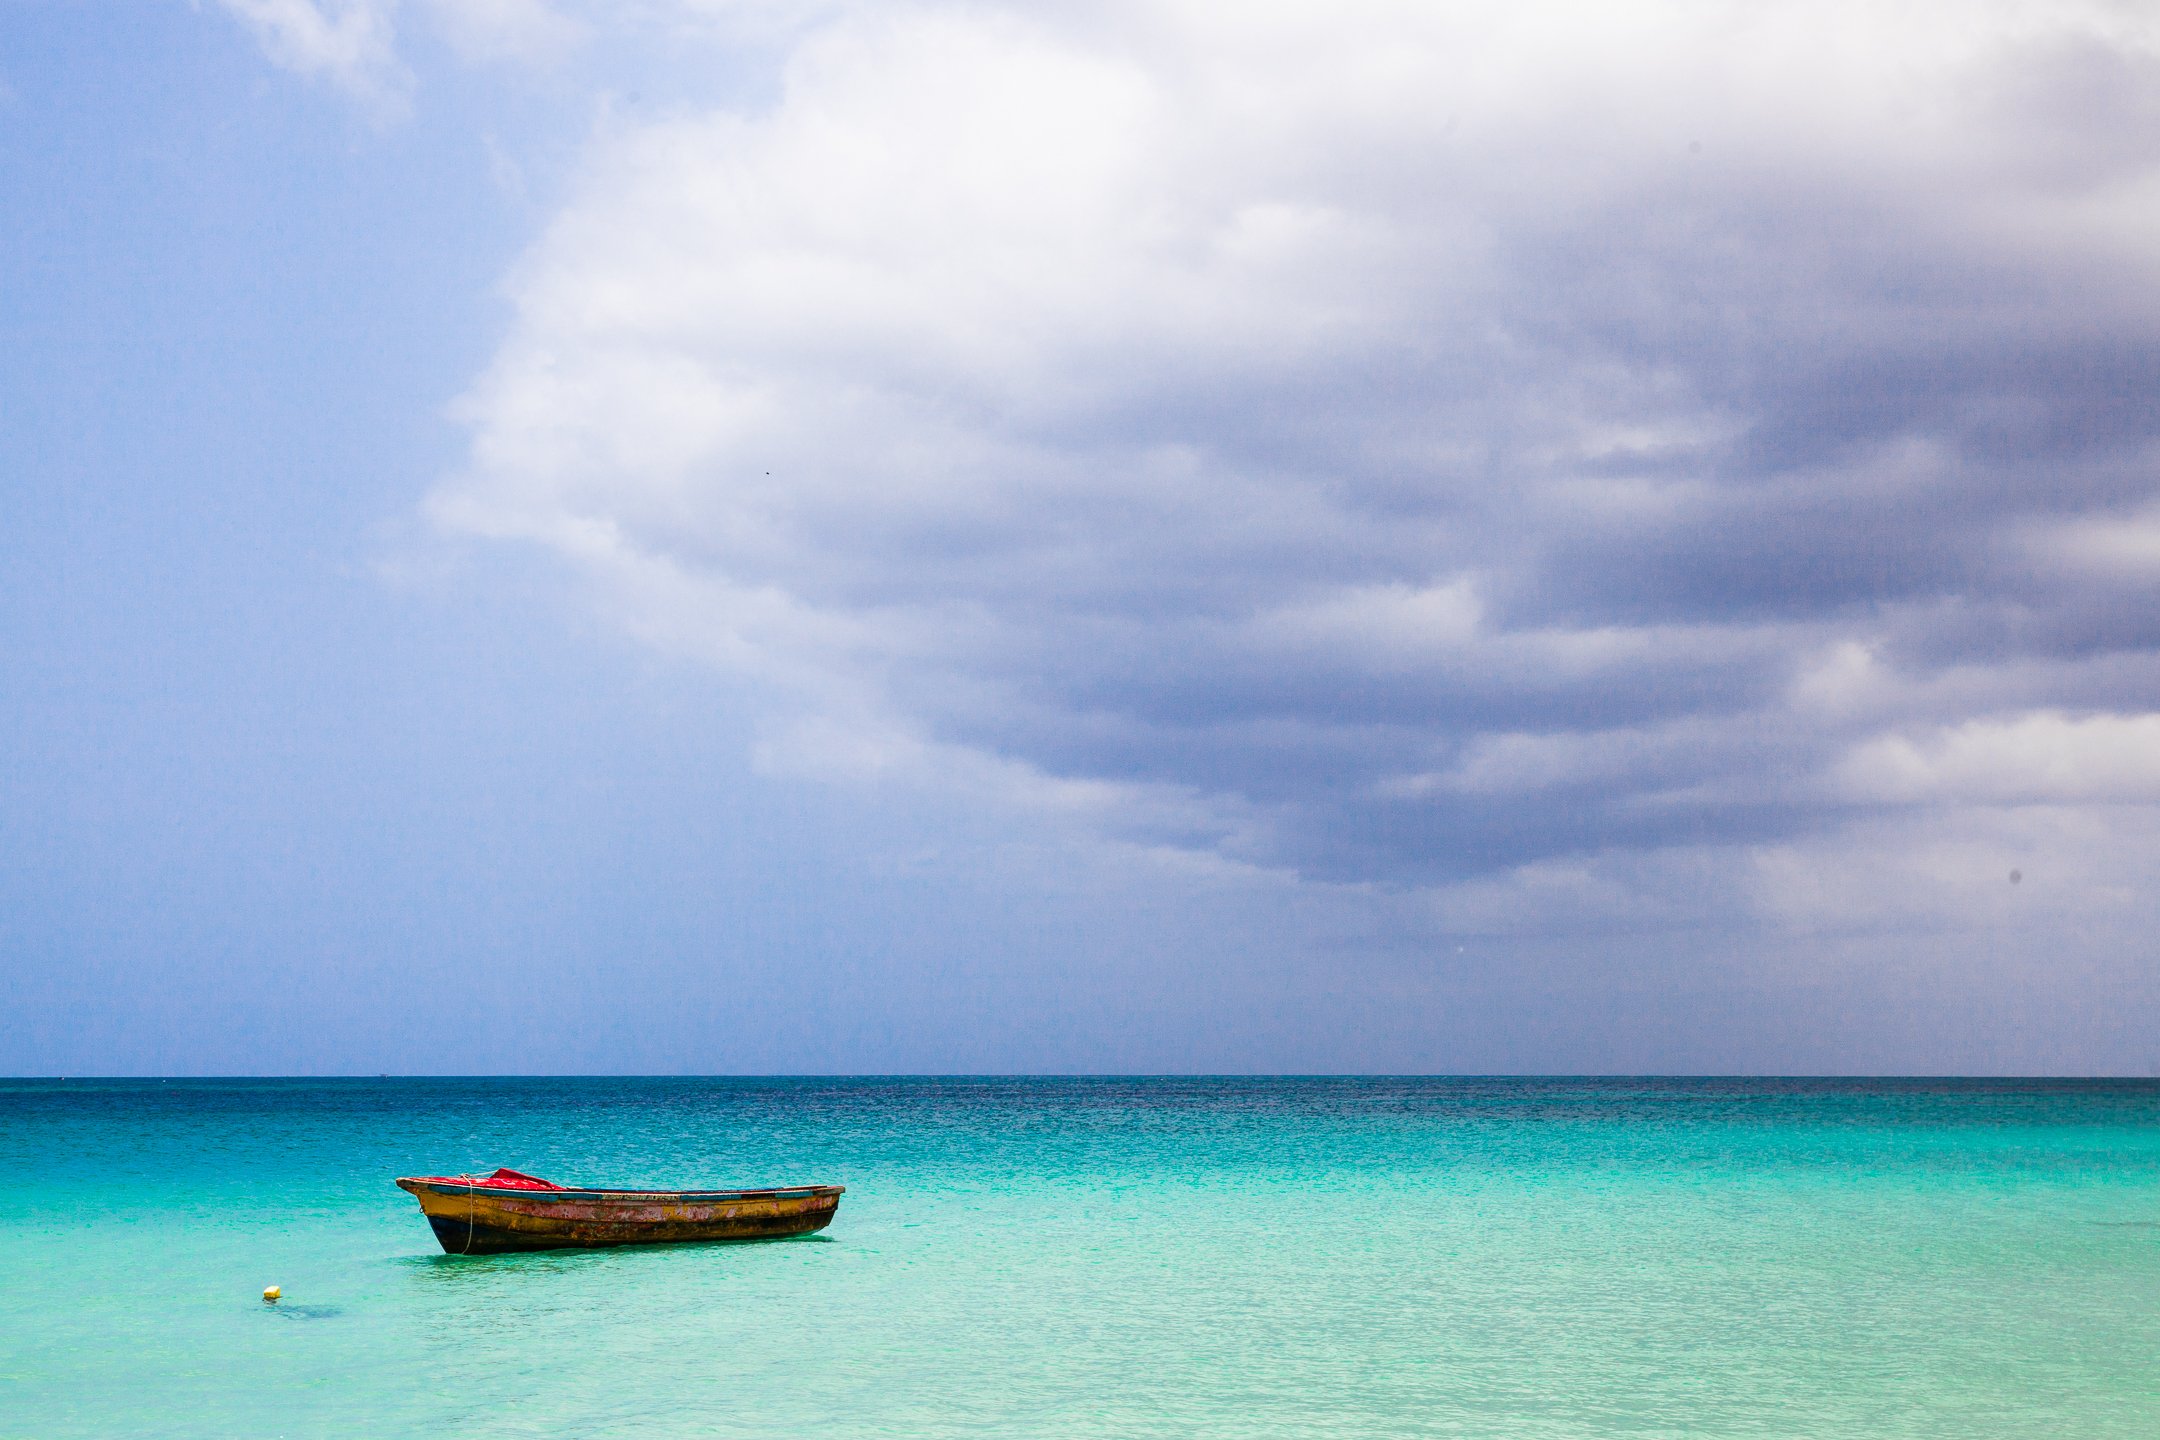  A story of turquoise water, Negril Jamaica 2014 © Laura Elo 